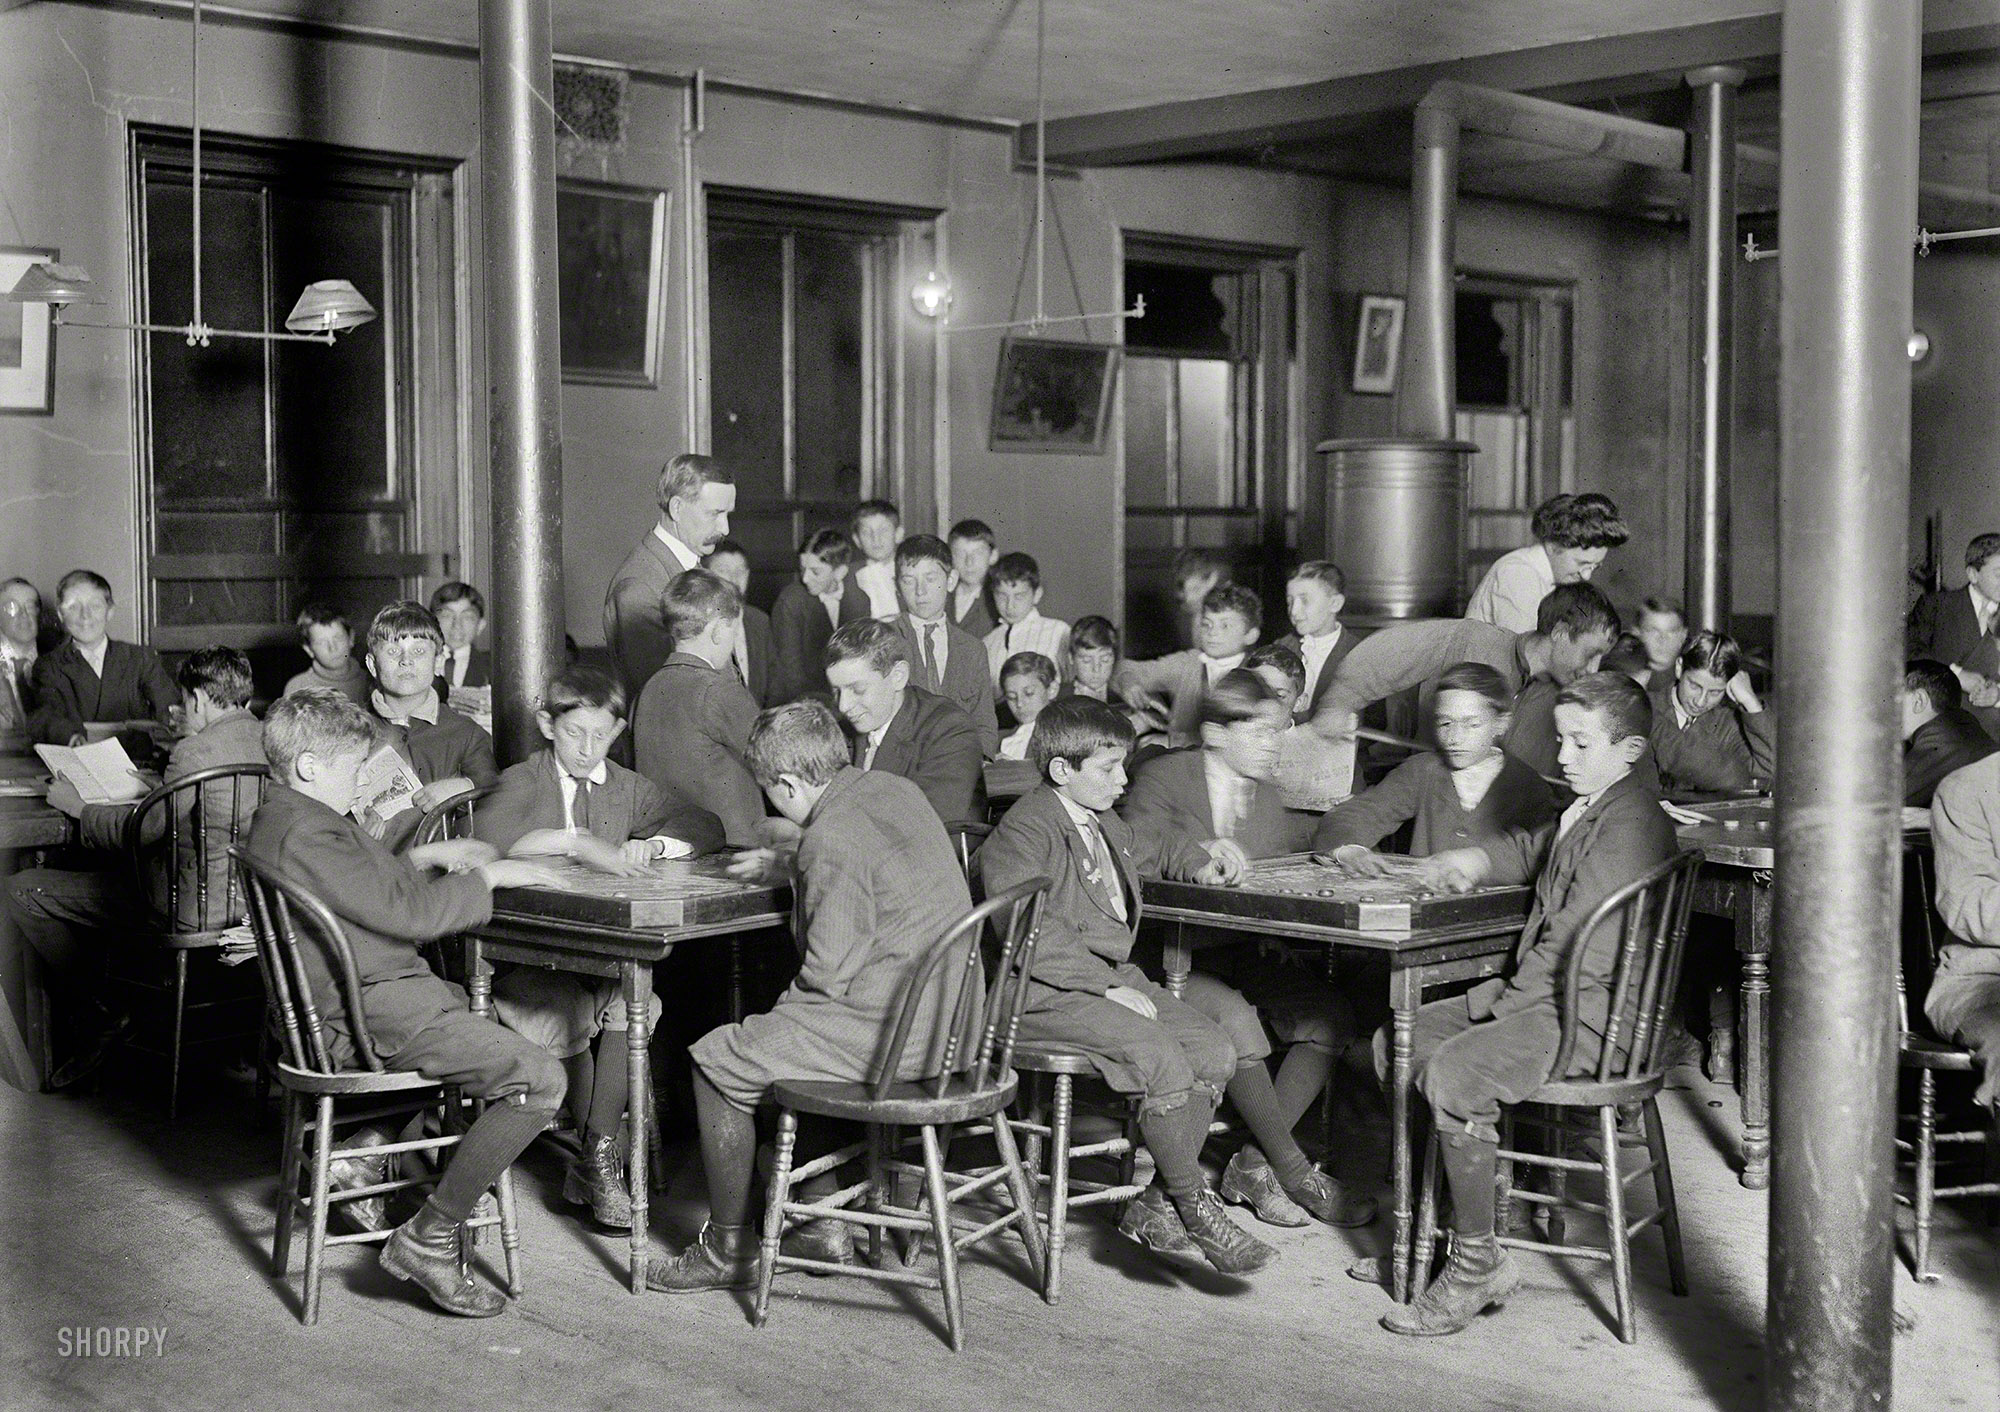 October 1909. Boston, Mass. "In the Newsboys Reading Room. Boys seated at tables playing games." Photograph by Lewis Wickes Hine. View full size.